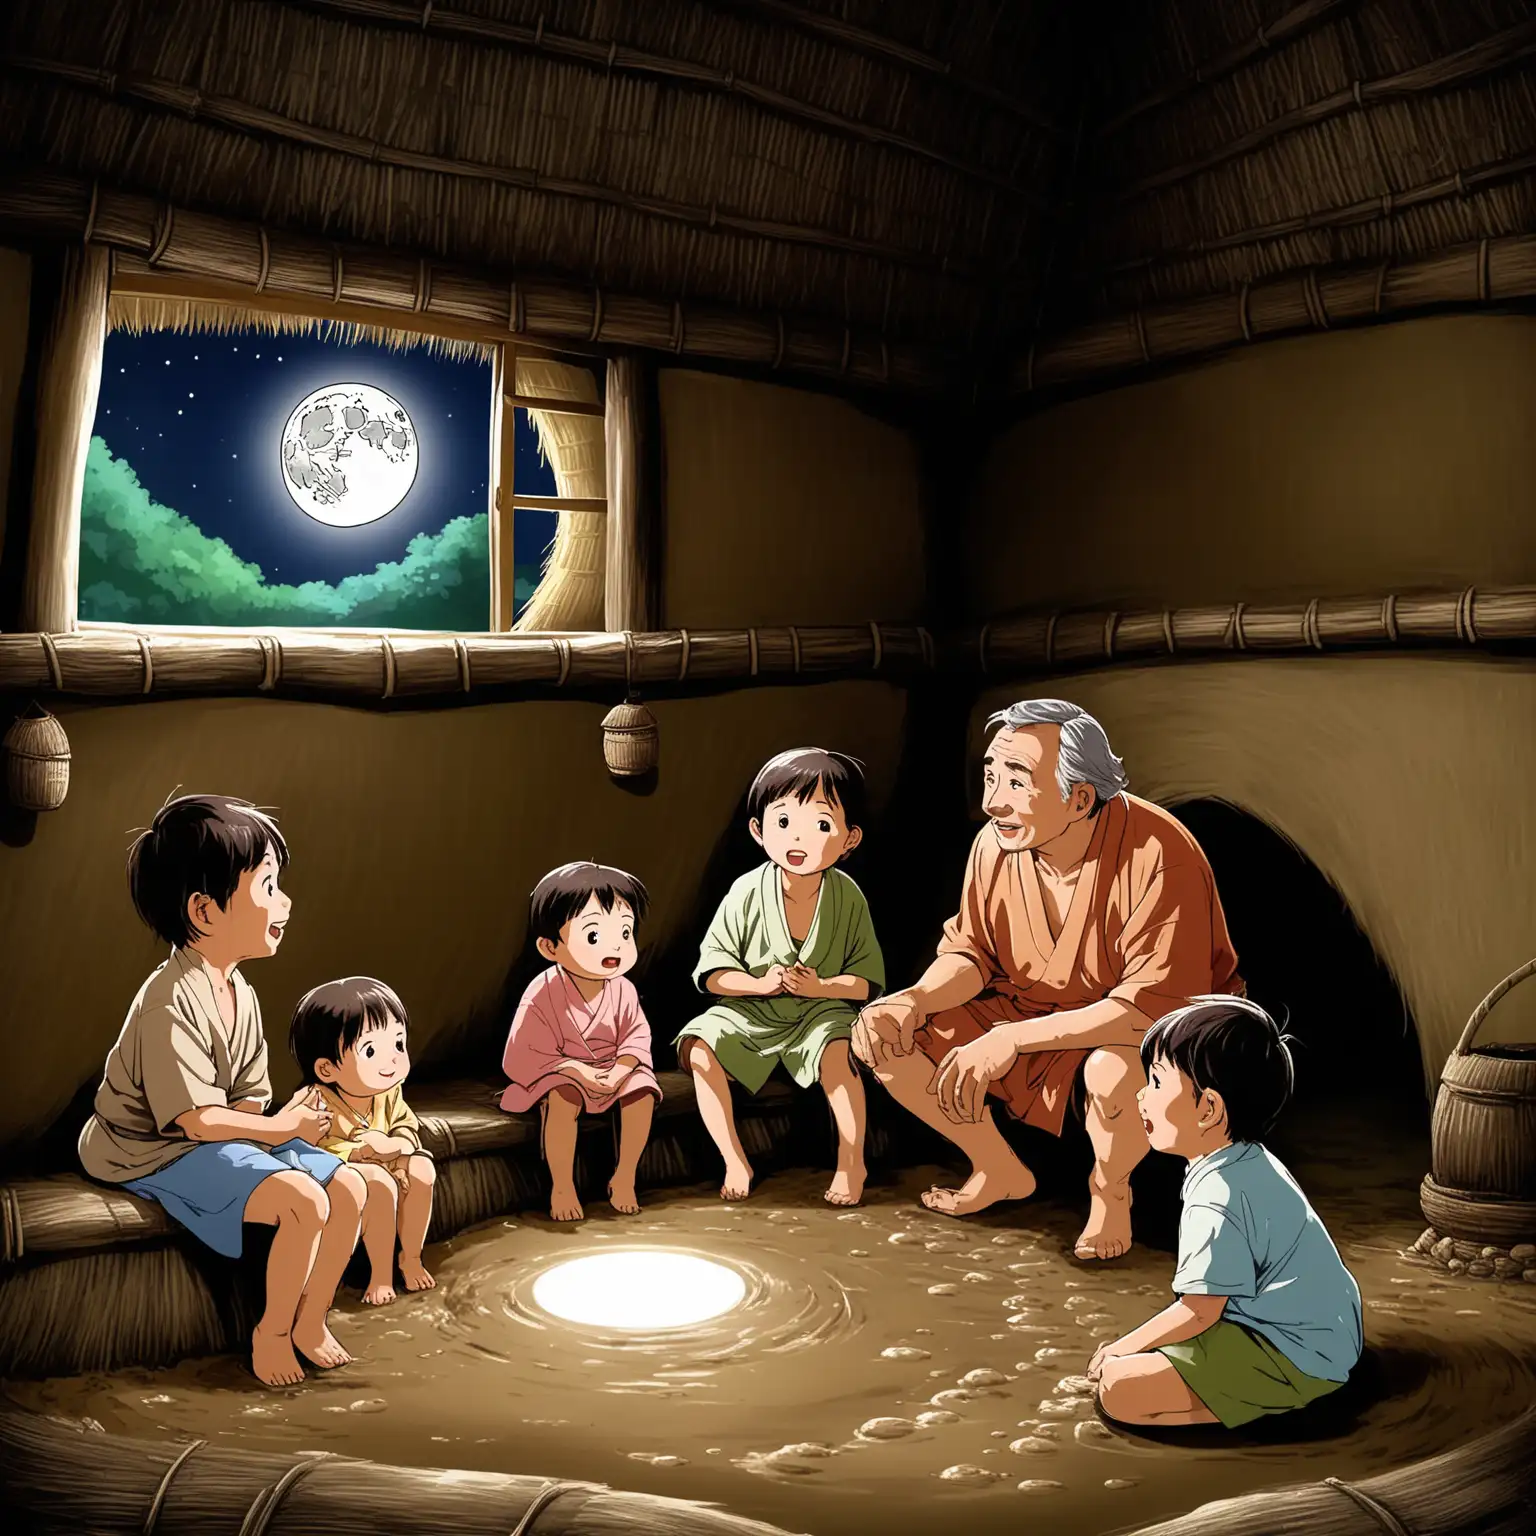 Moonlit-Storytelling-in-a-Traditional-African-Hut